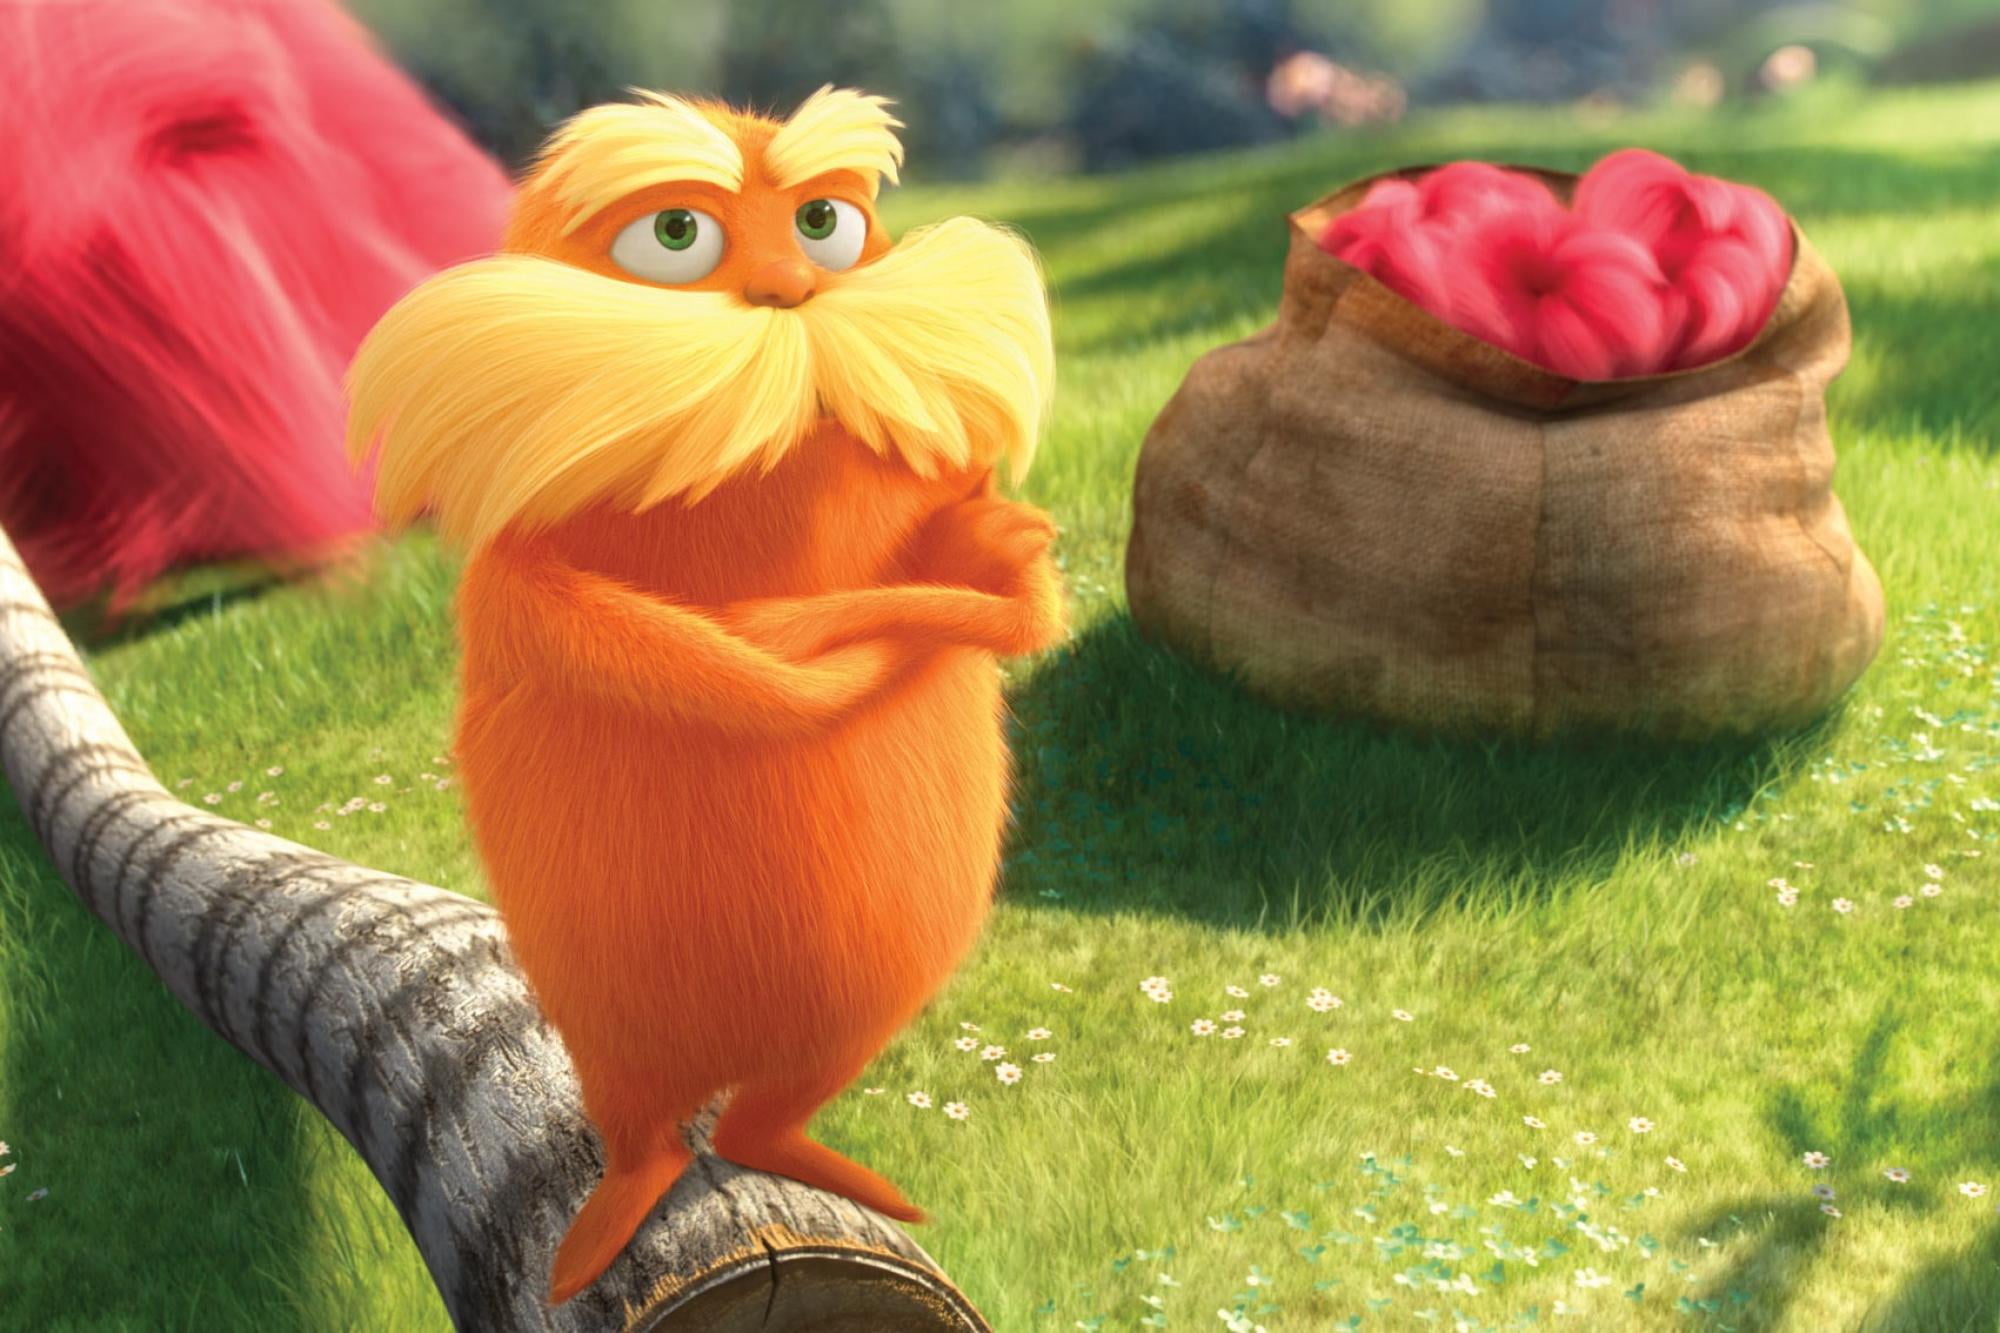 Dr Seuss The Lorax 2012, Movies, Hollywood Movies, plant, grass